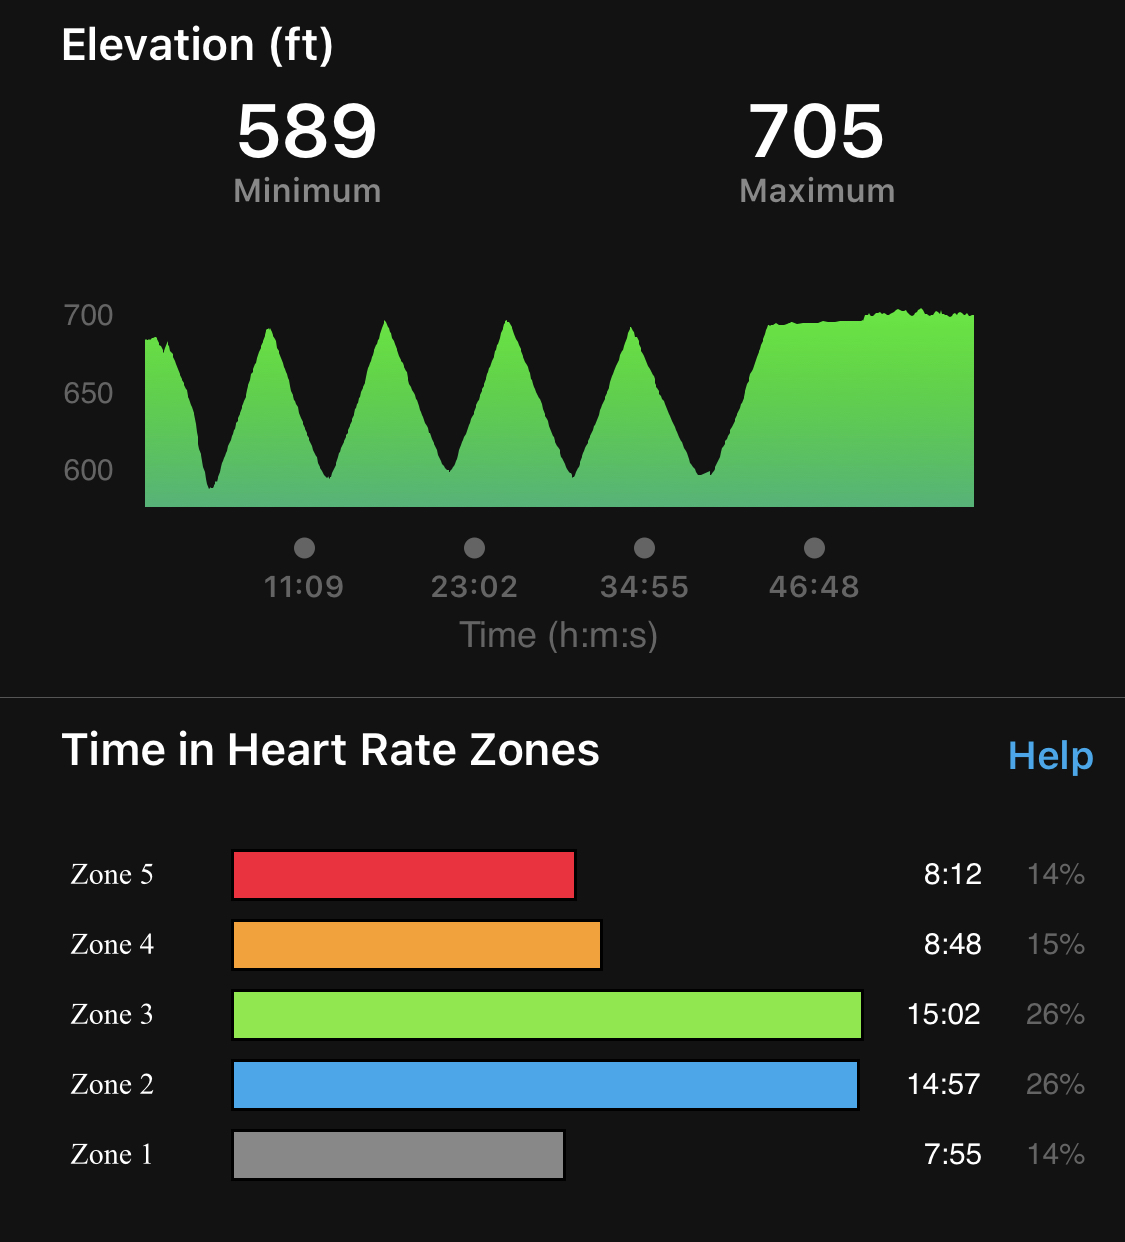 iPhone Screenshot from Garmin.  Elevation chart on top shows 5 hill climbs of approximately 100' gain over 1/2 mile and Time in Heart Rate Zones.  Zone 5  for 8 mins 12 seconds, Zone 4 fir 8 minutes 48 seconds, Zone 3 for 15 minutes 2 seconds, Zone 2 for 14 minutes 57 seconds and Zone 1 for 7 minutes 55 seconds